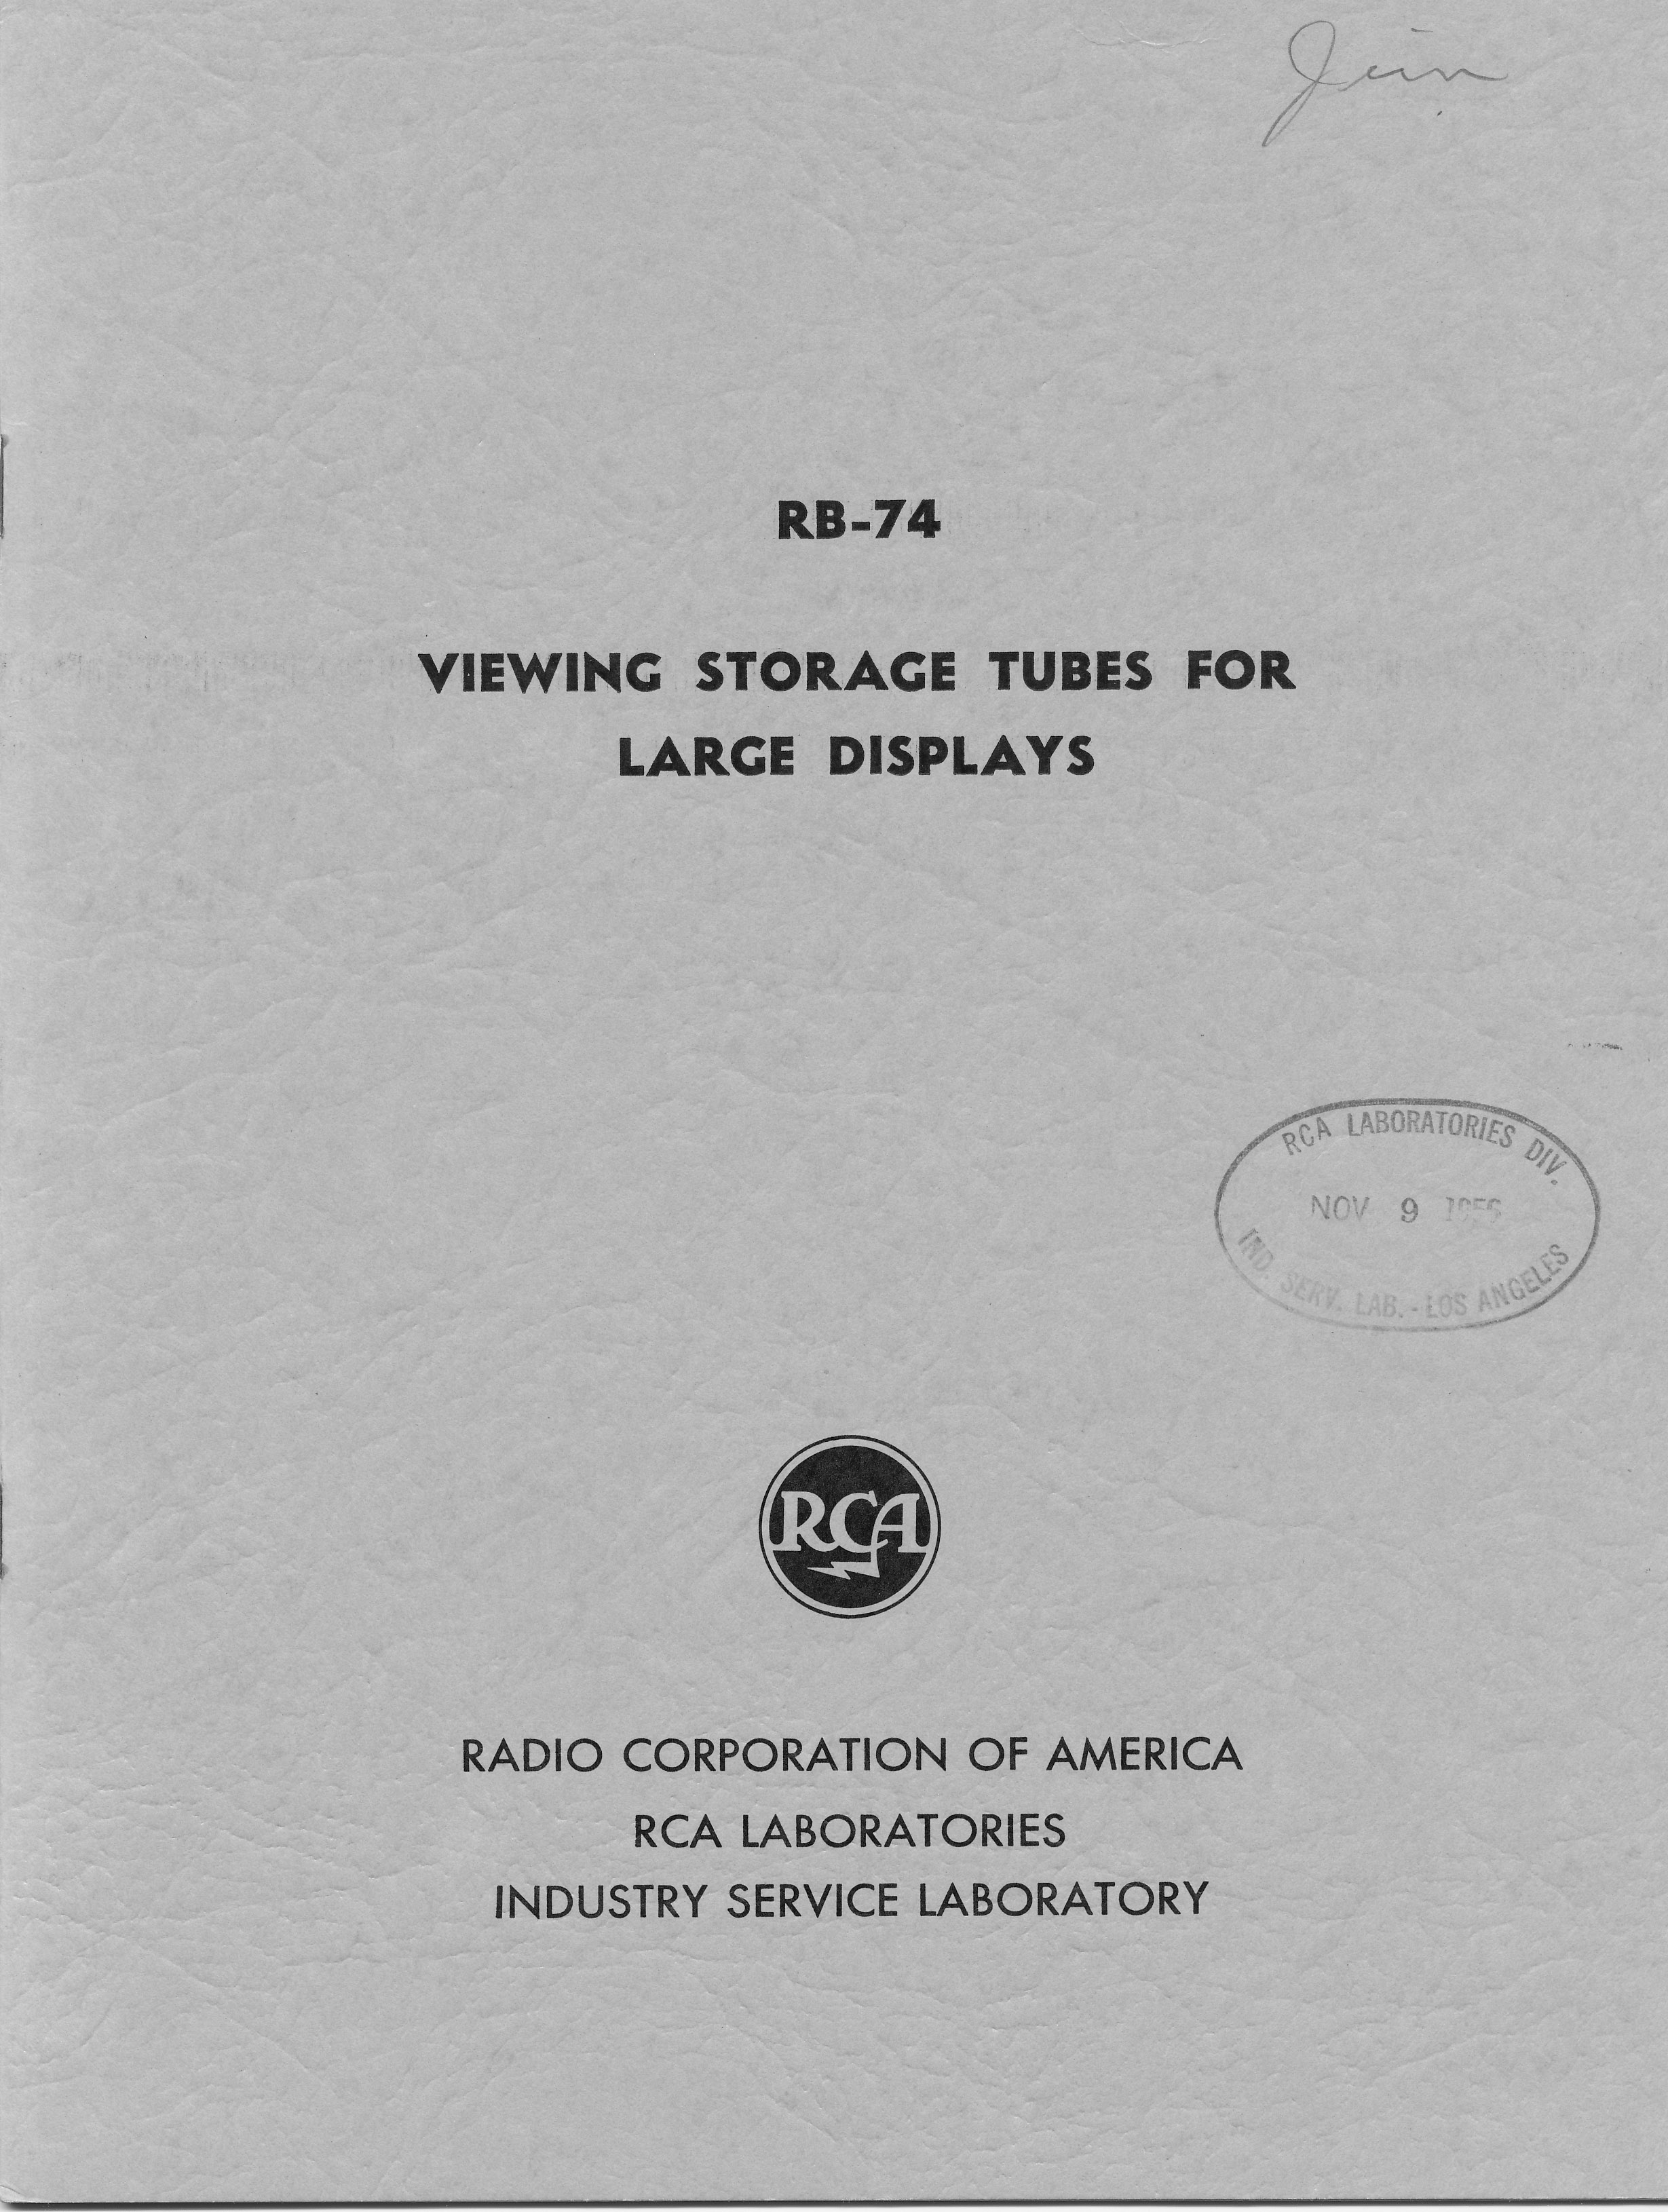 Viewing Storage Tubes for Large Screen Displays, RCA Report RB-74